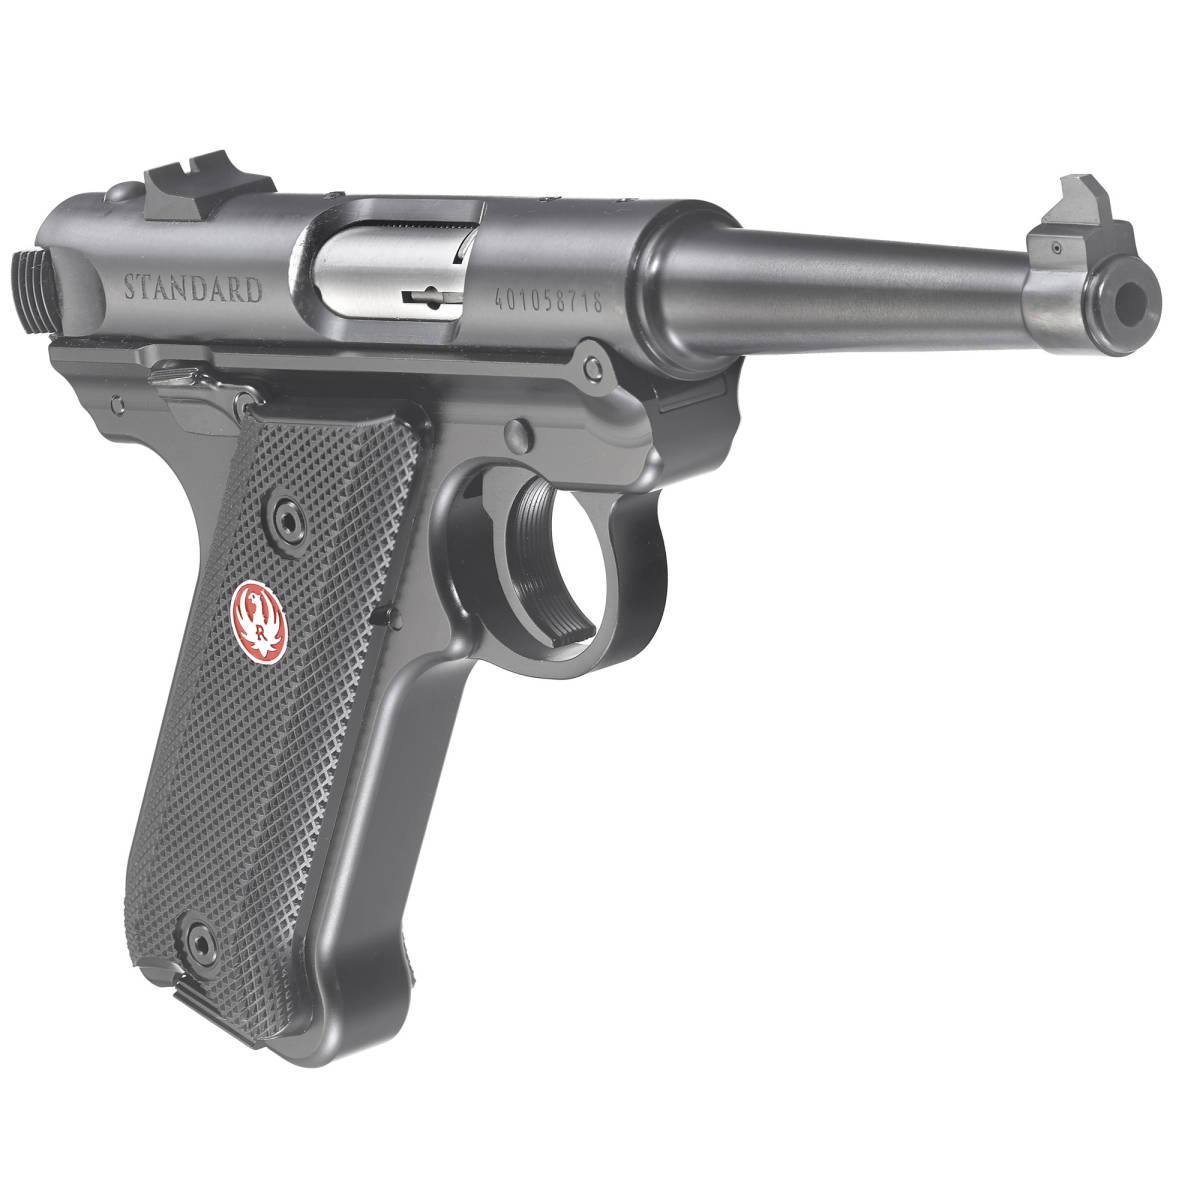 Ruger Mark IV Standard 22 LR 2-10rd Mags 4.75In 40104-img-1